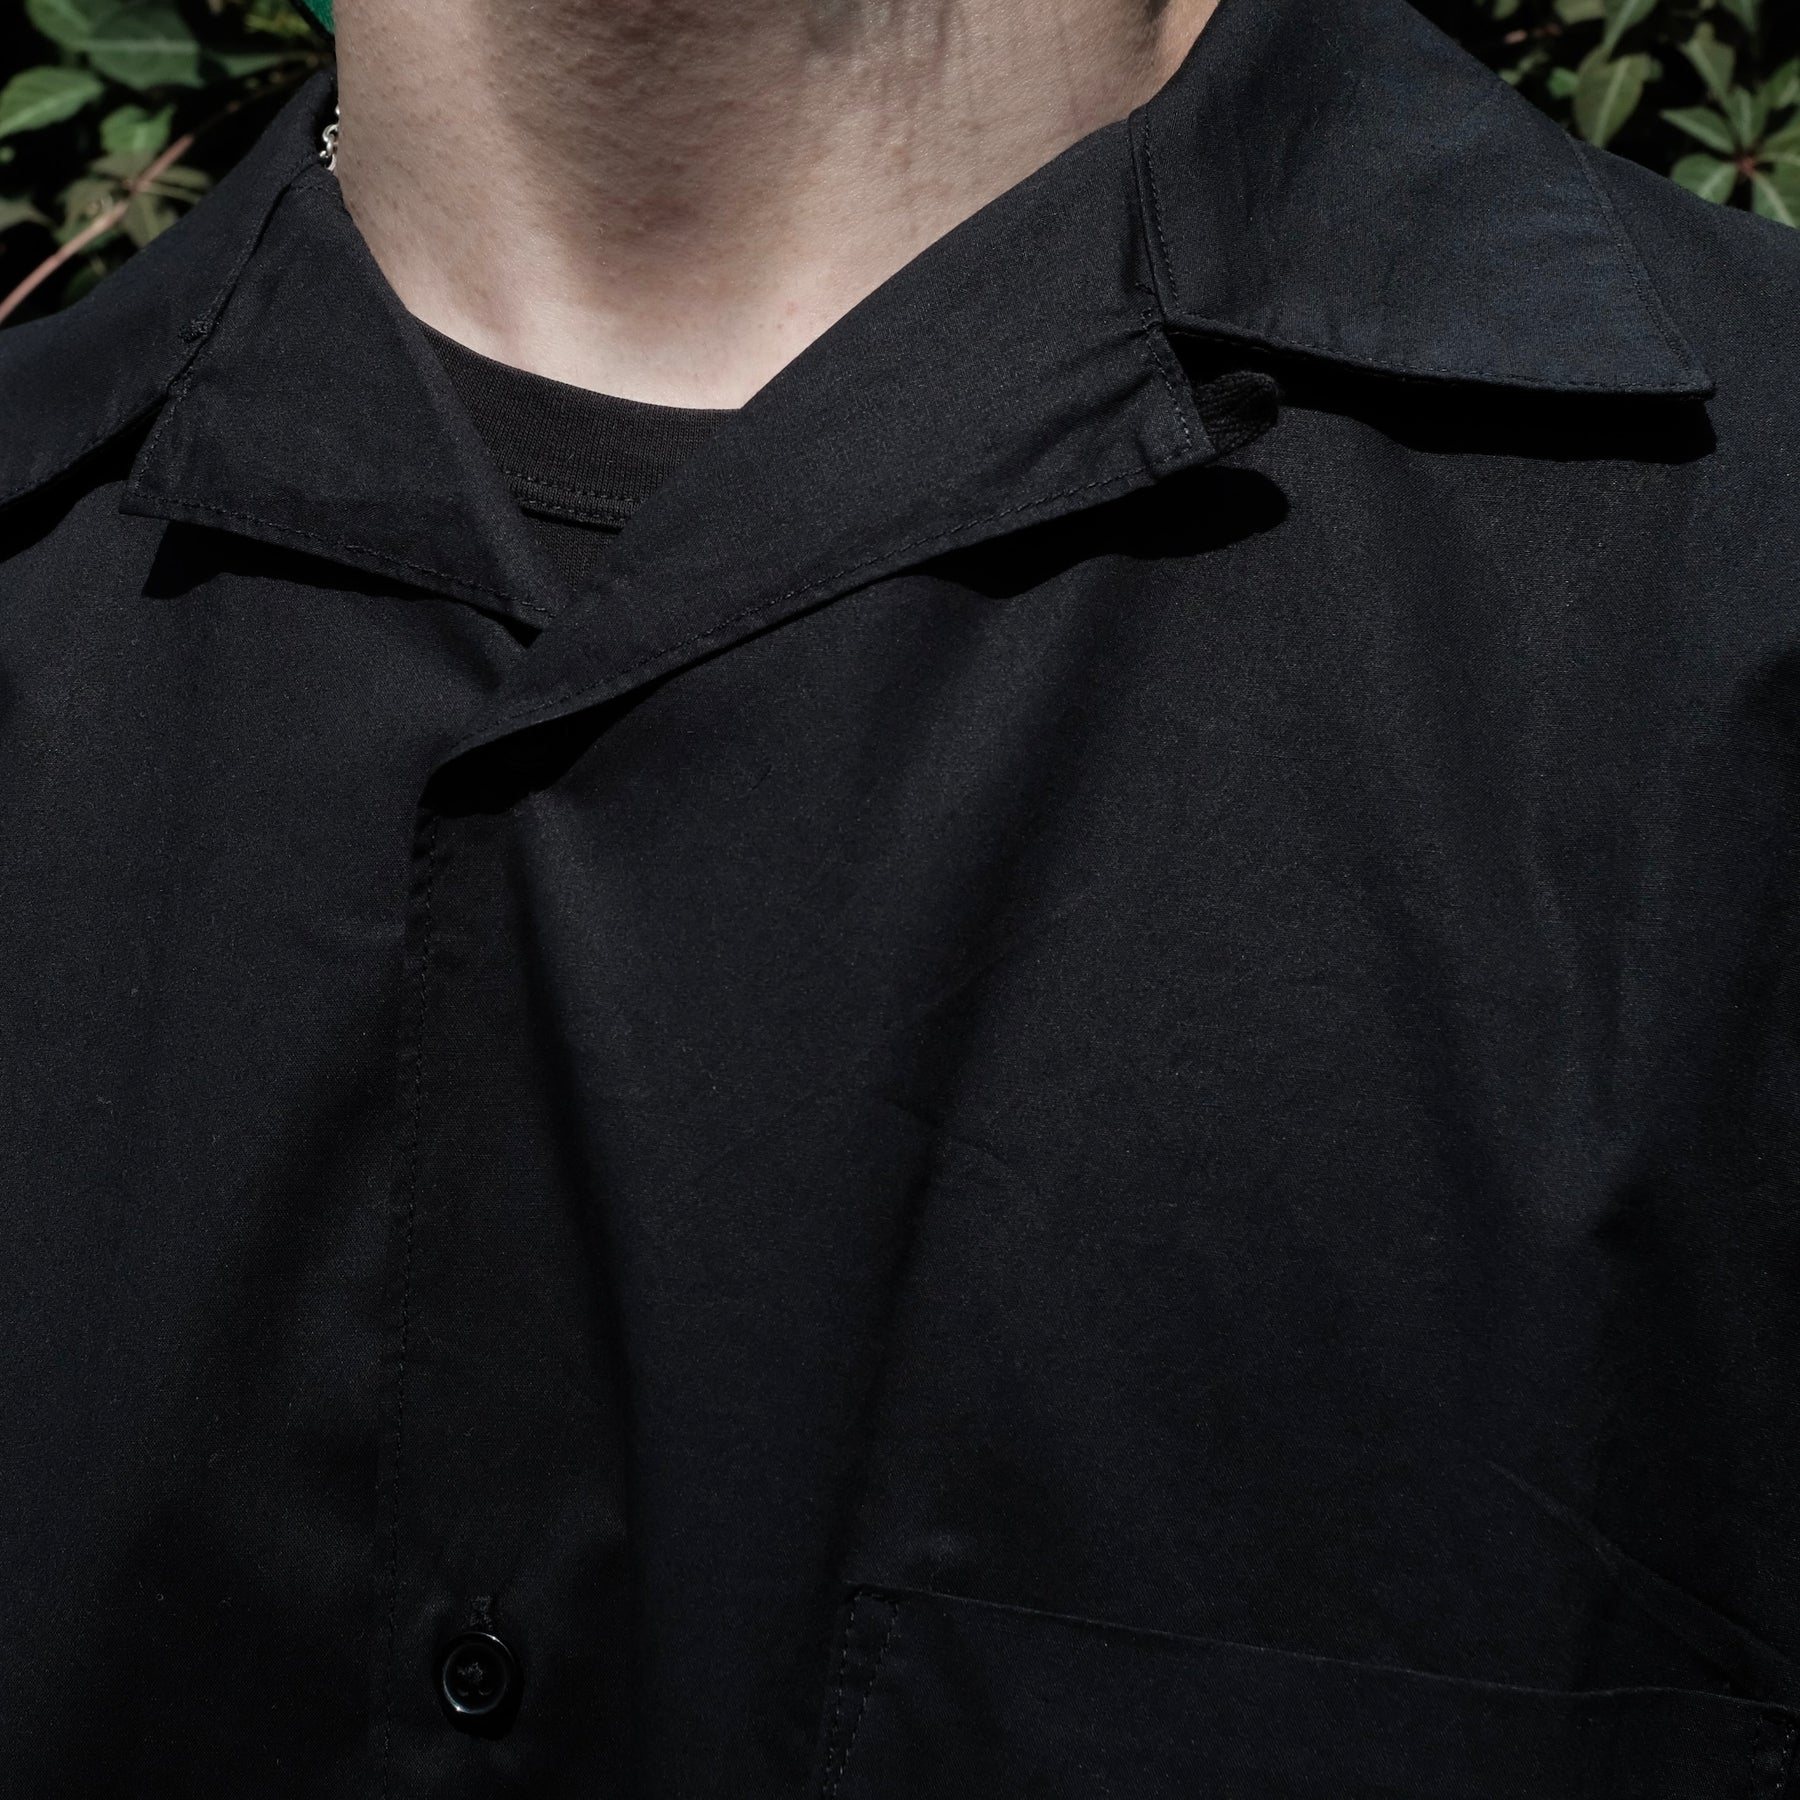 WILLY CHAVARRIA / OPEN COLLARED SHIRT BLACK